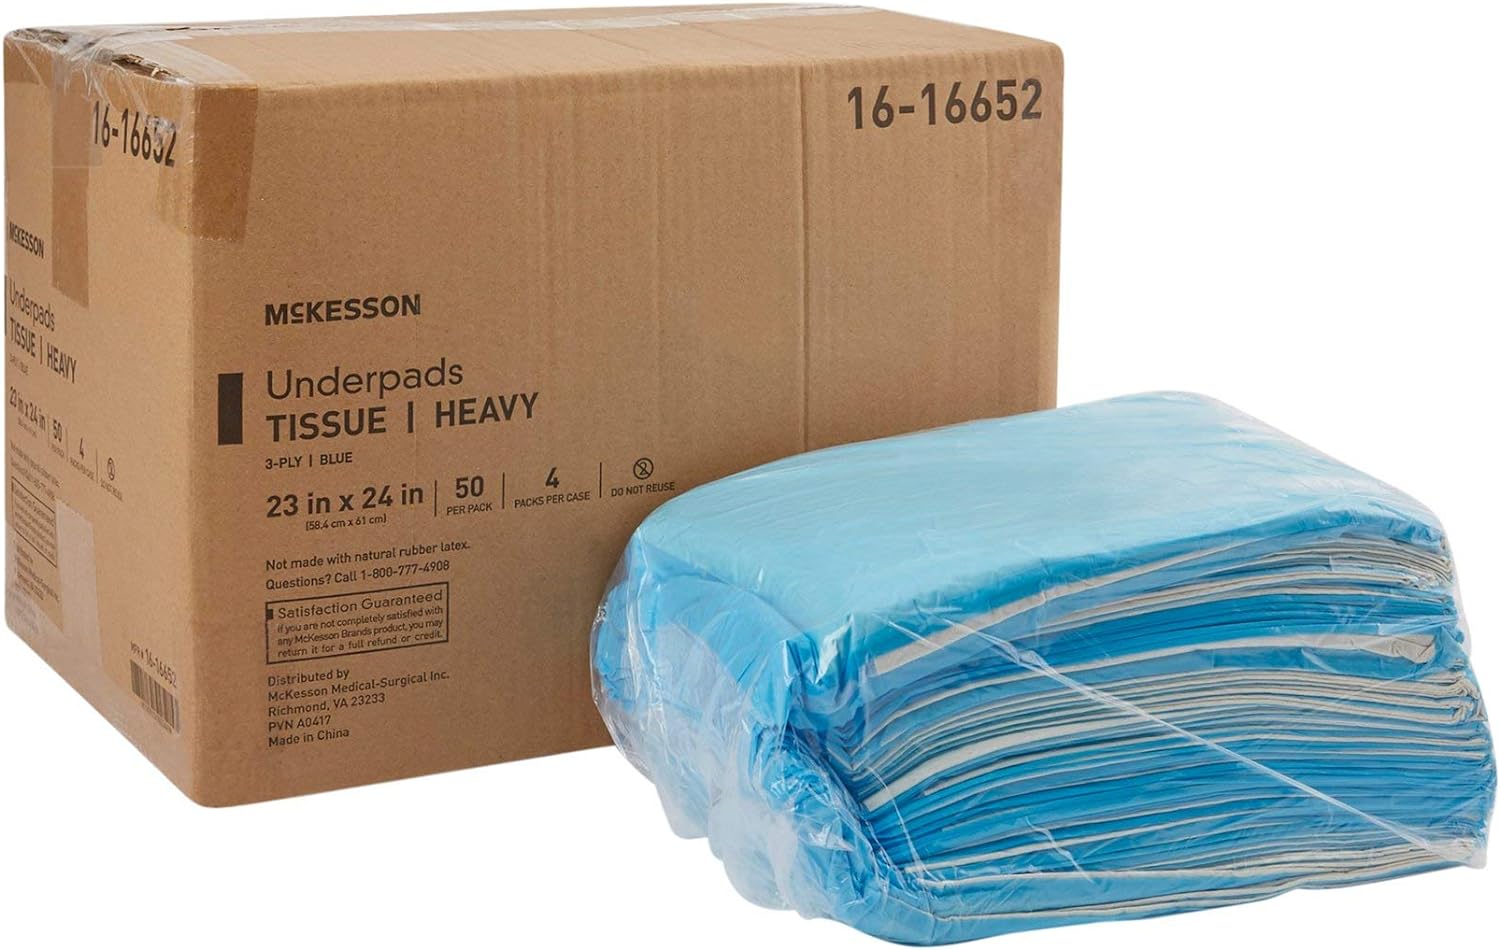 McKesson Underpads, Tissue, Heavy, 3-Ply, Blue, 23 in x 24 in, 200 Count